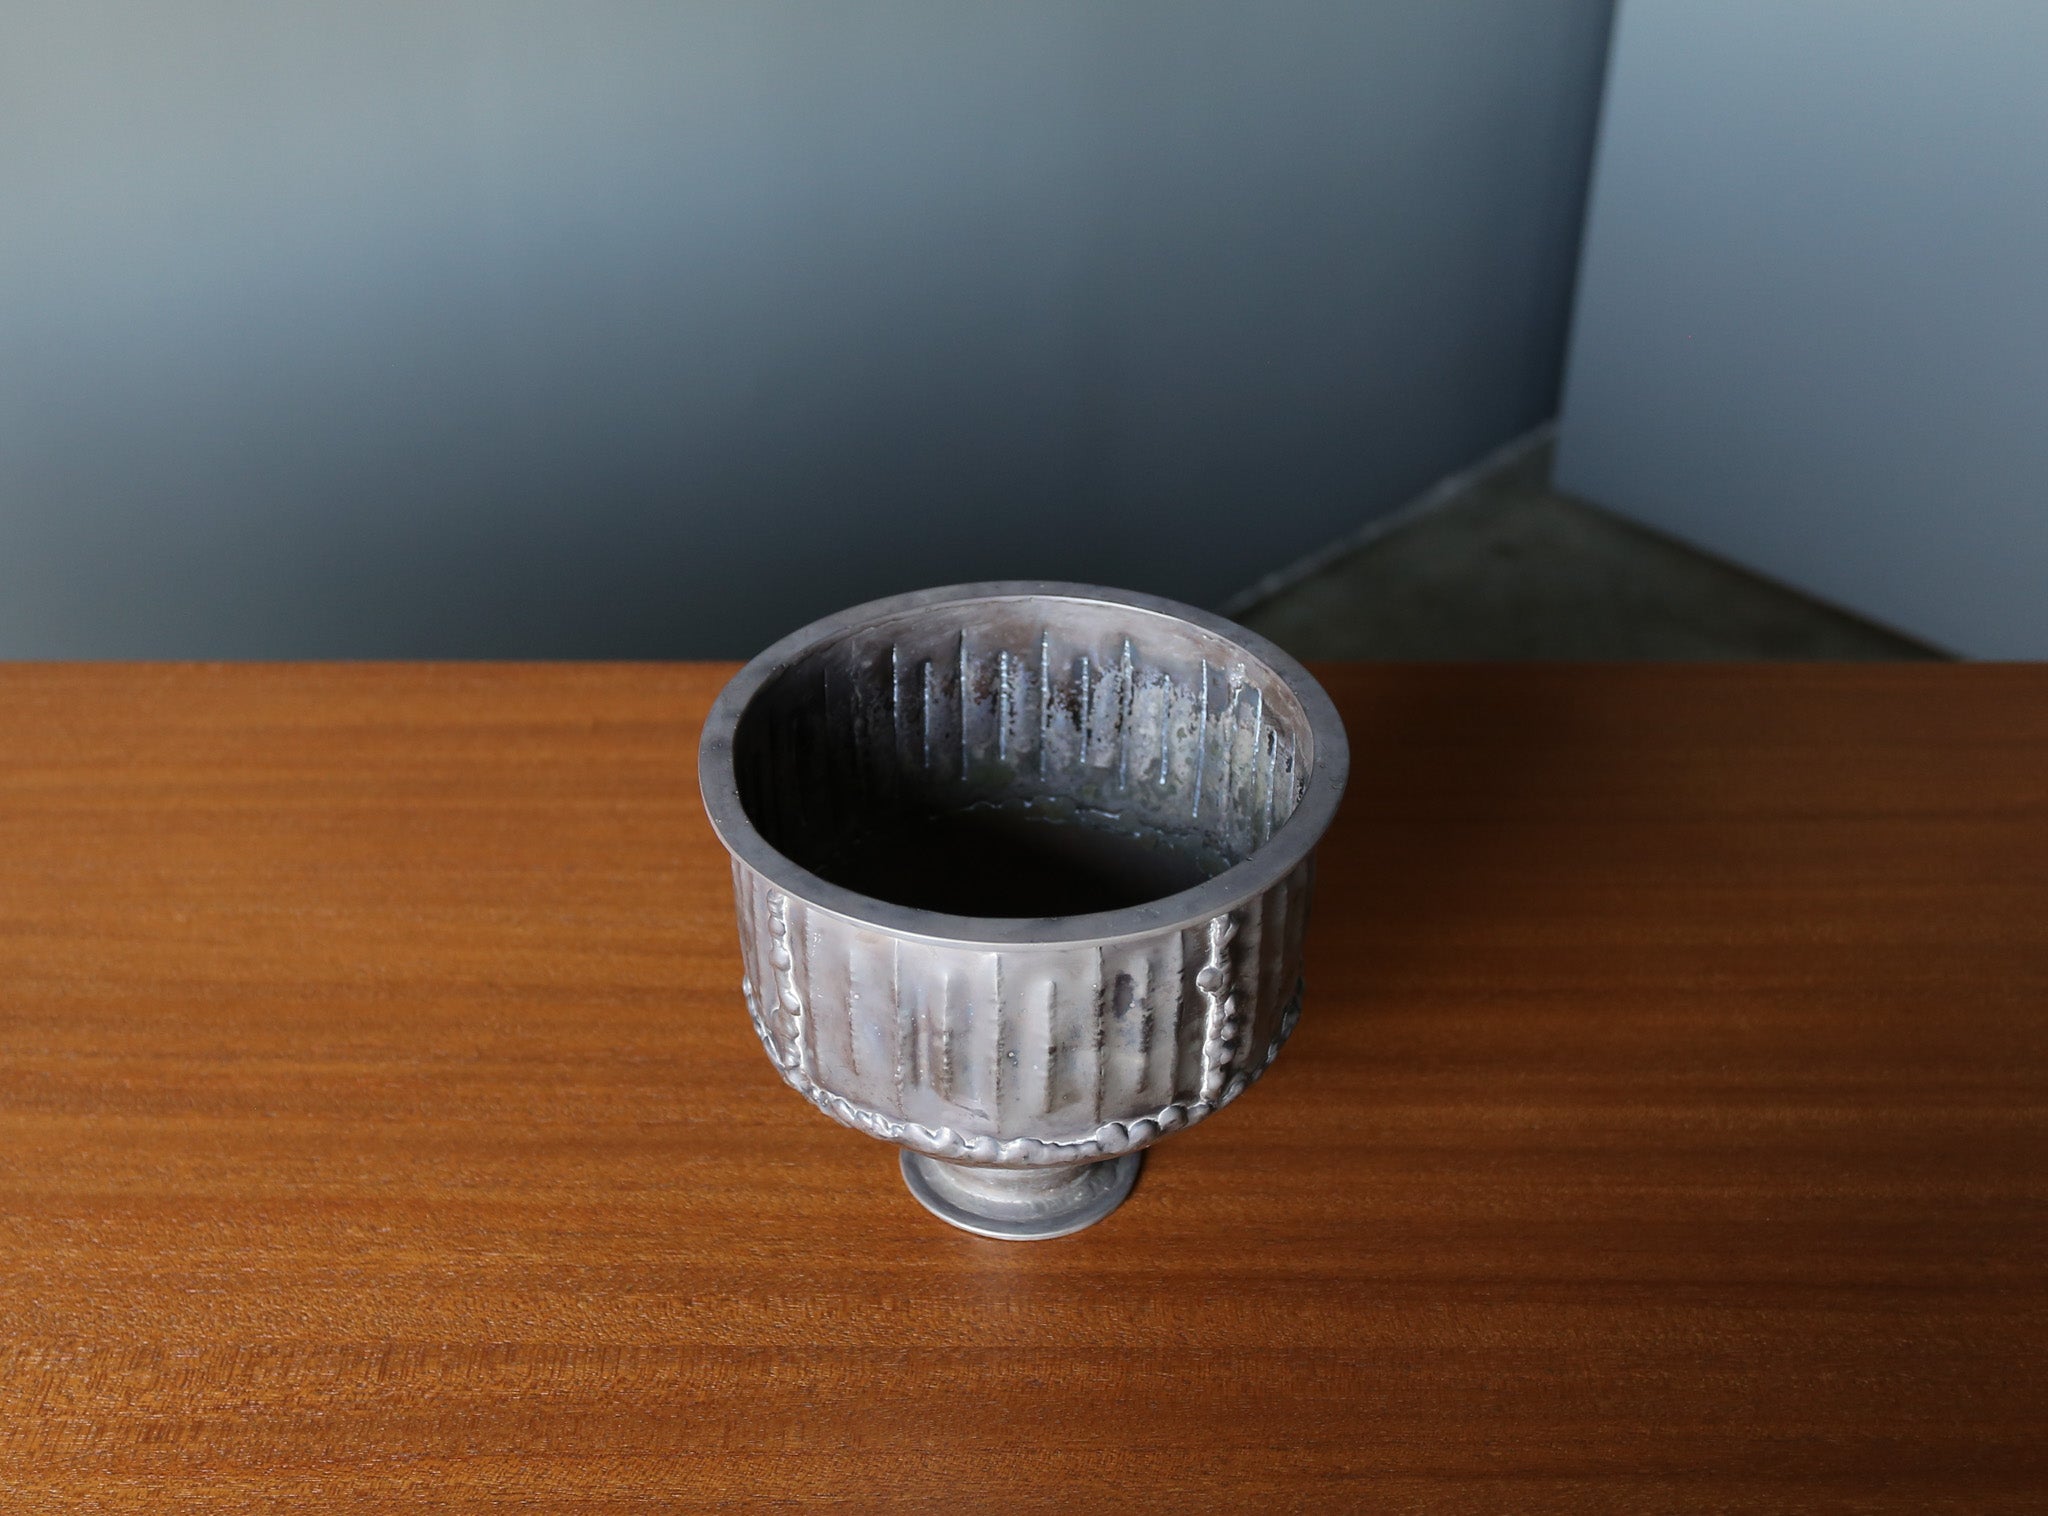 Dextra Frankel Welded 800 Silver Footed Bowl, California, c.1970